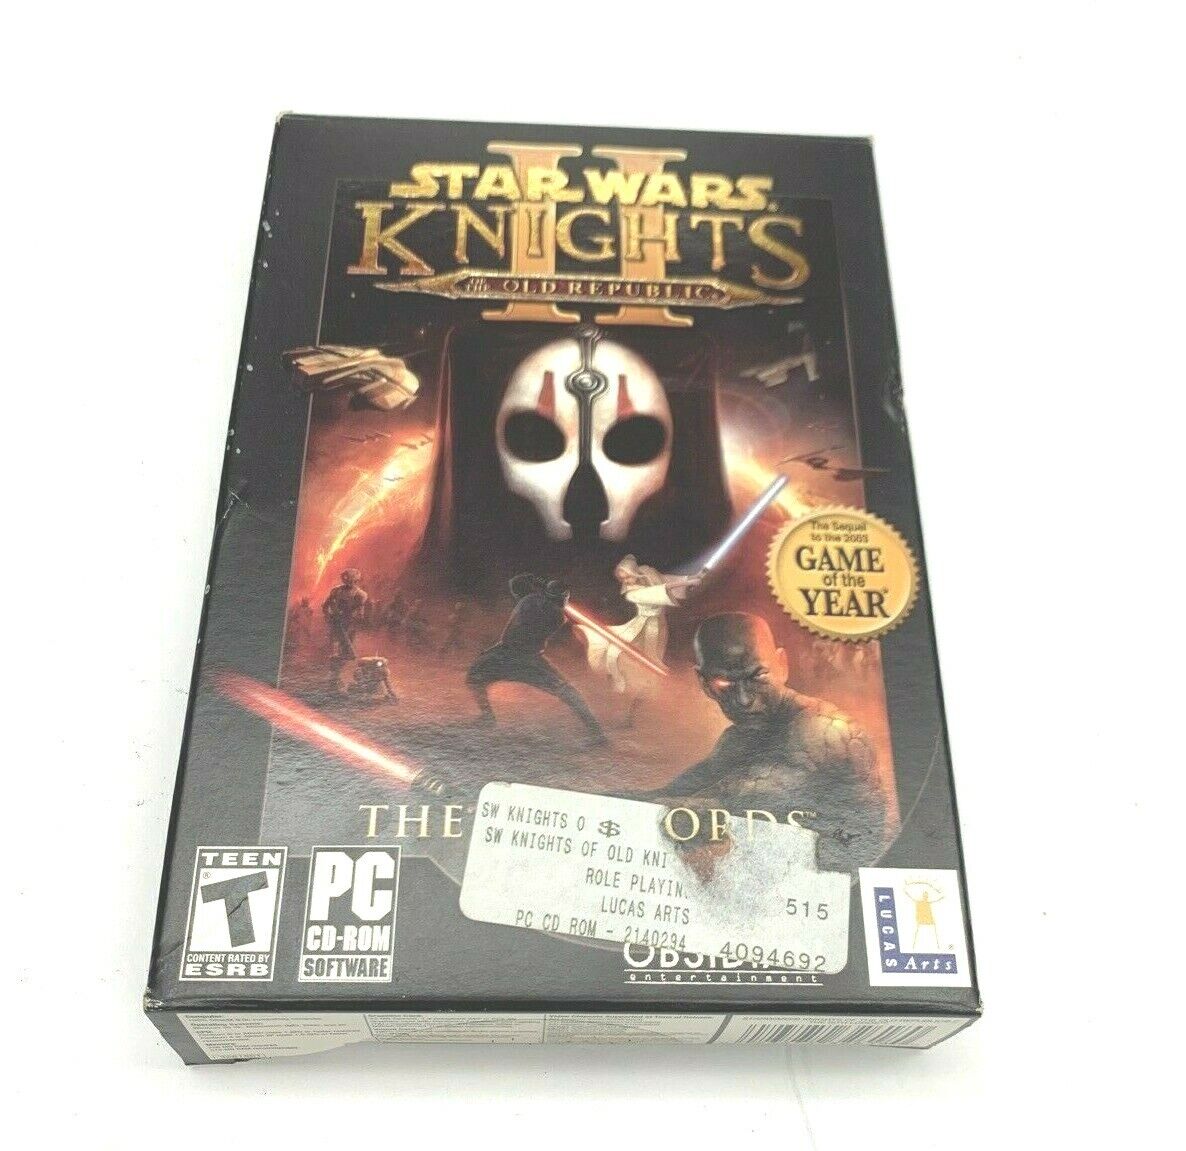 STAR WARS KNIGHTS OF THE OLD REPUBLIC, PC CD-ROM MISSING DISK 1